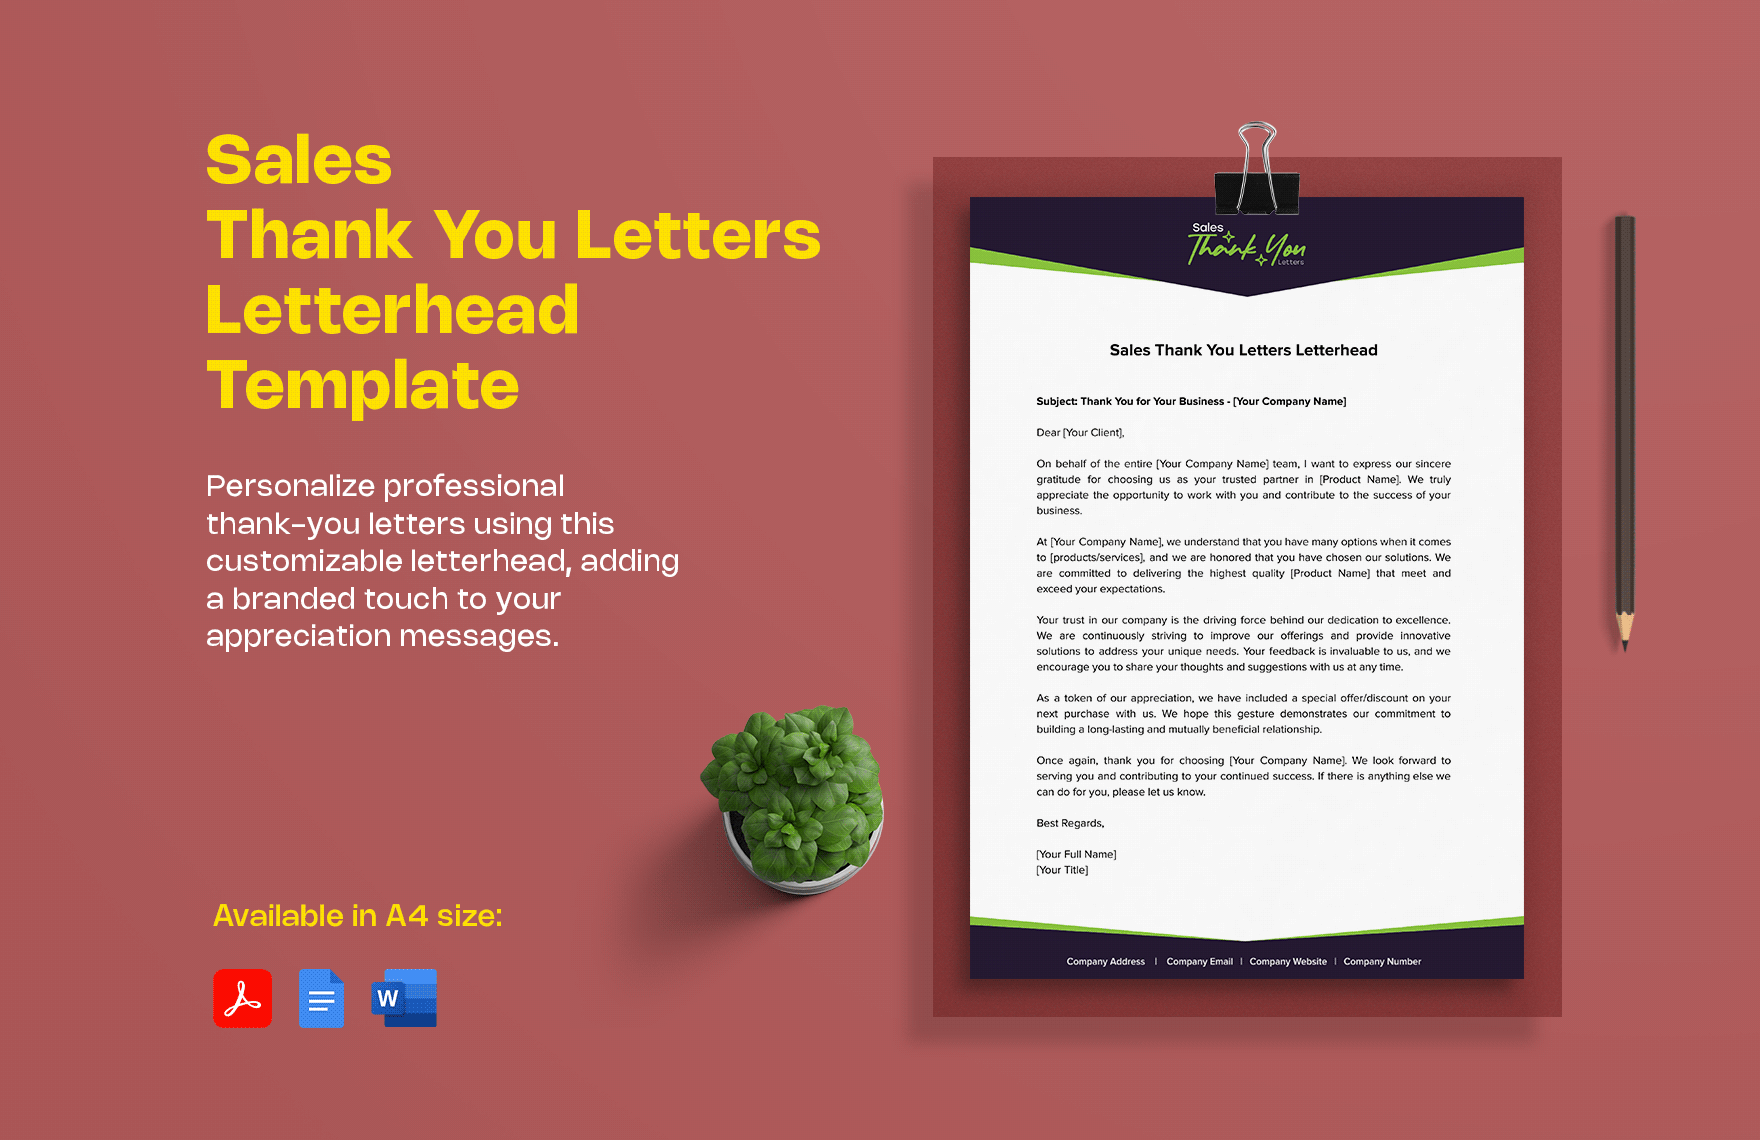 Sales Thank You Letters Letterhead Template